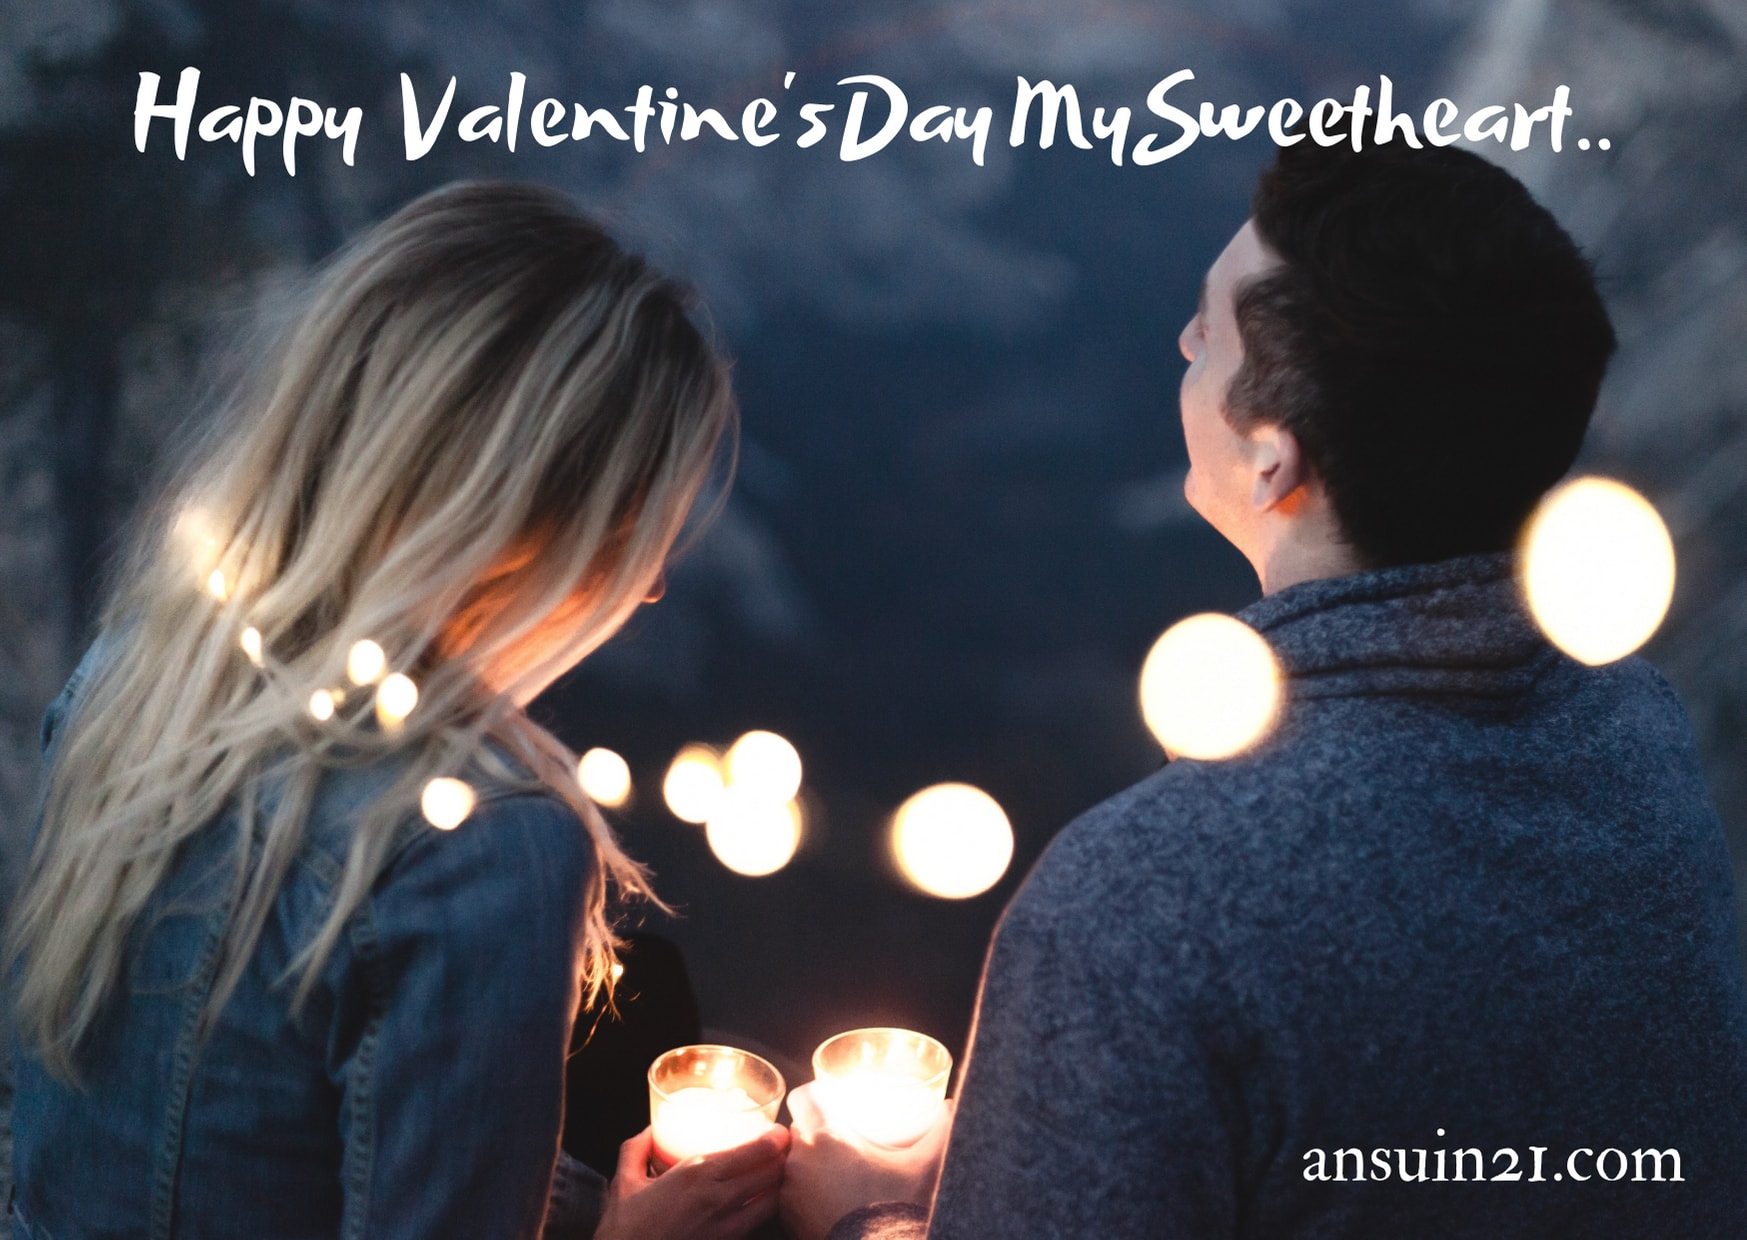 Happy Valentine's Day Wishes, Images & Quotes